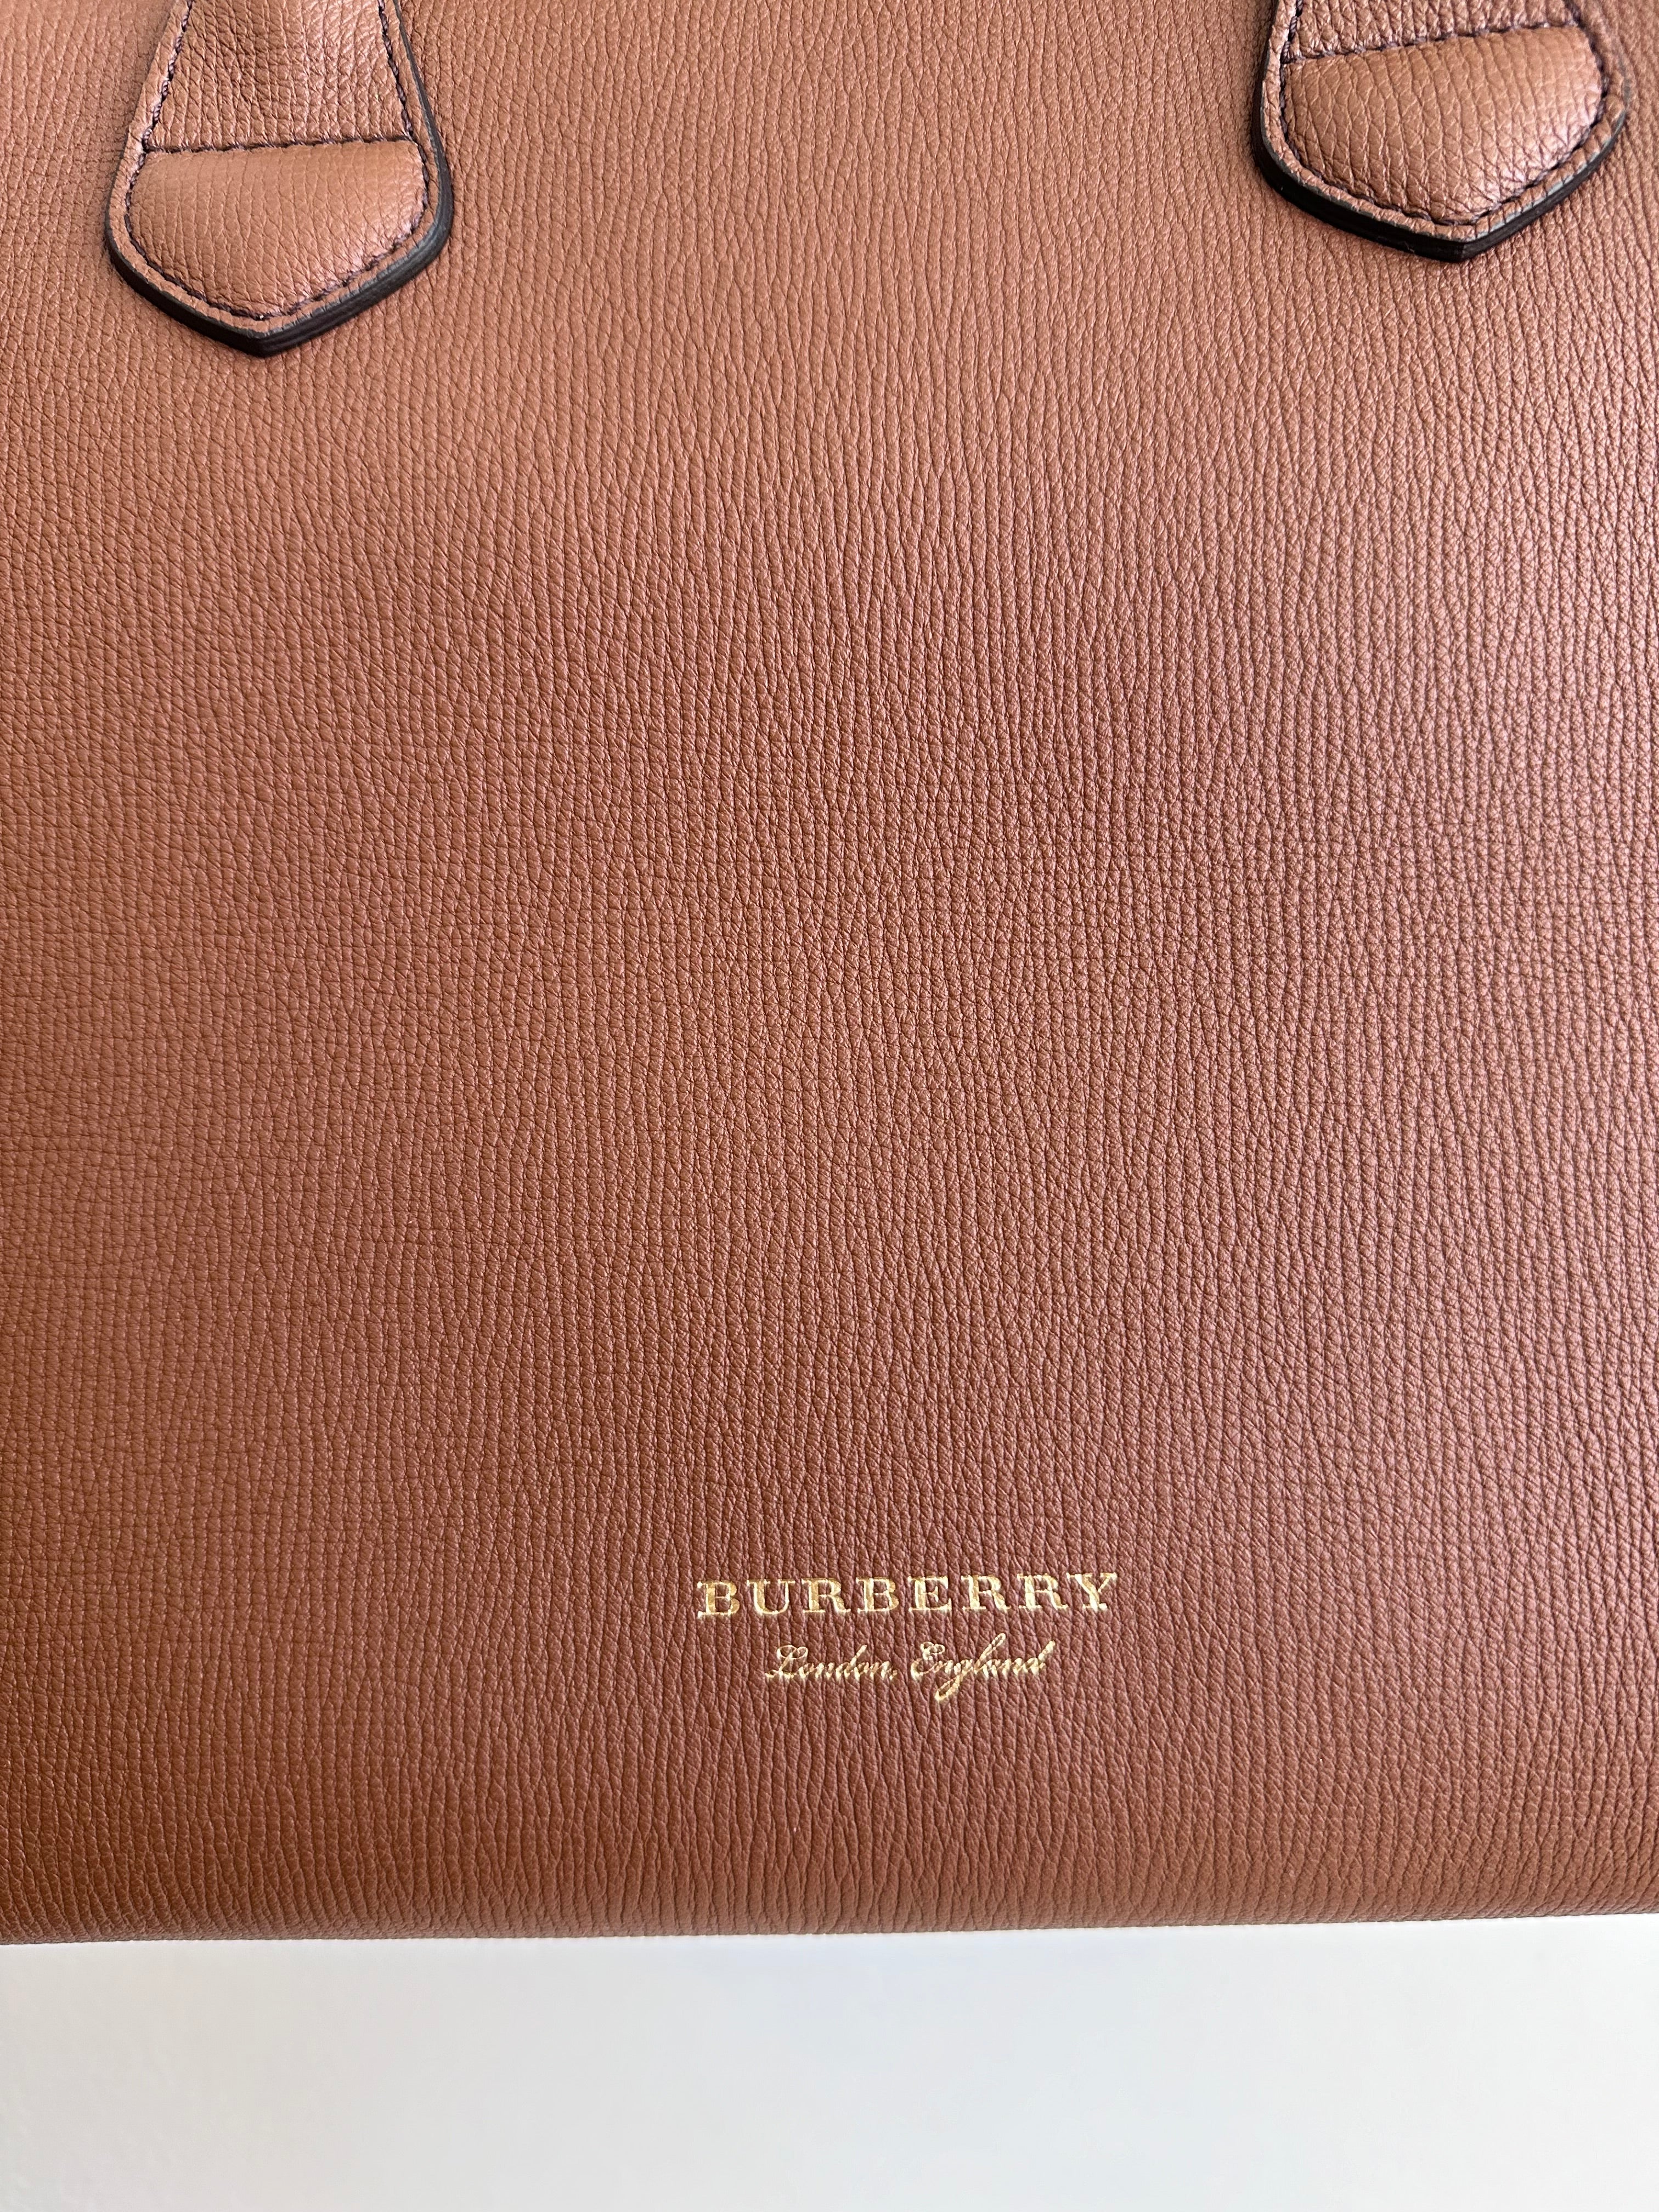 Pre-Owned BURBERRY Banner Tote